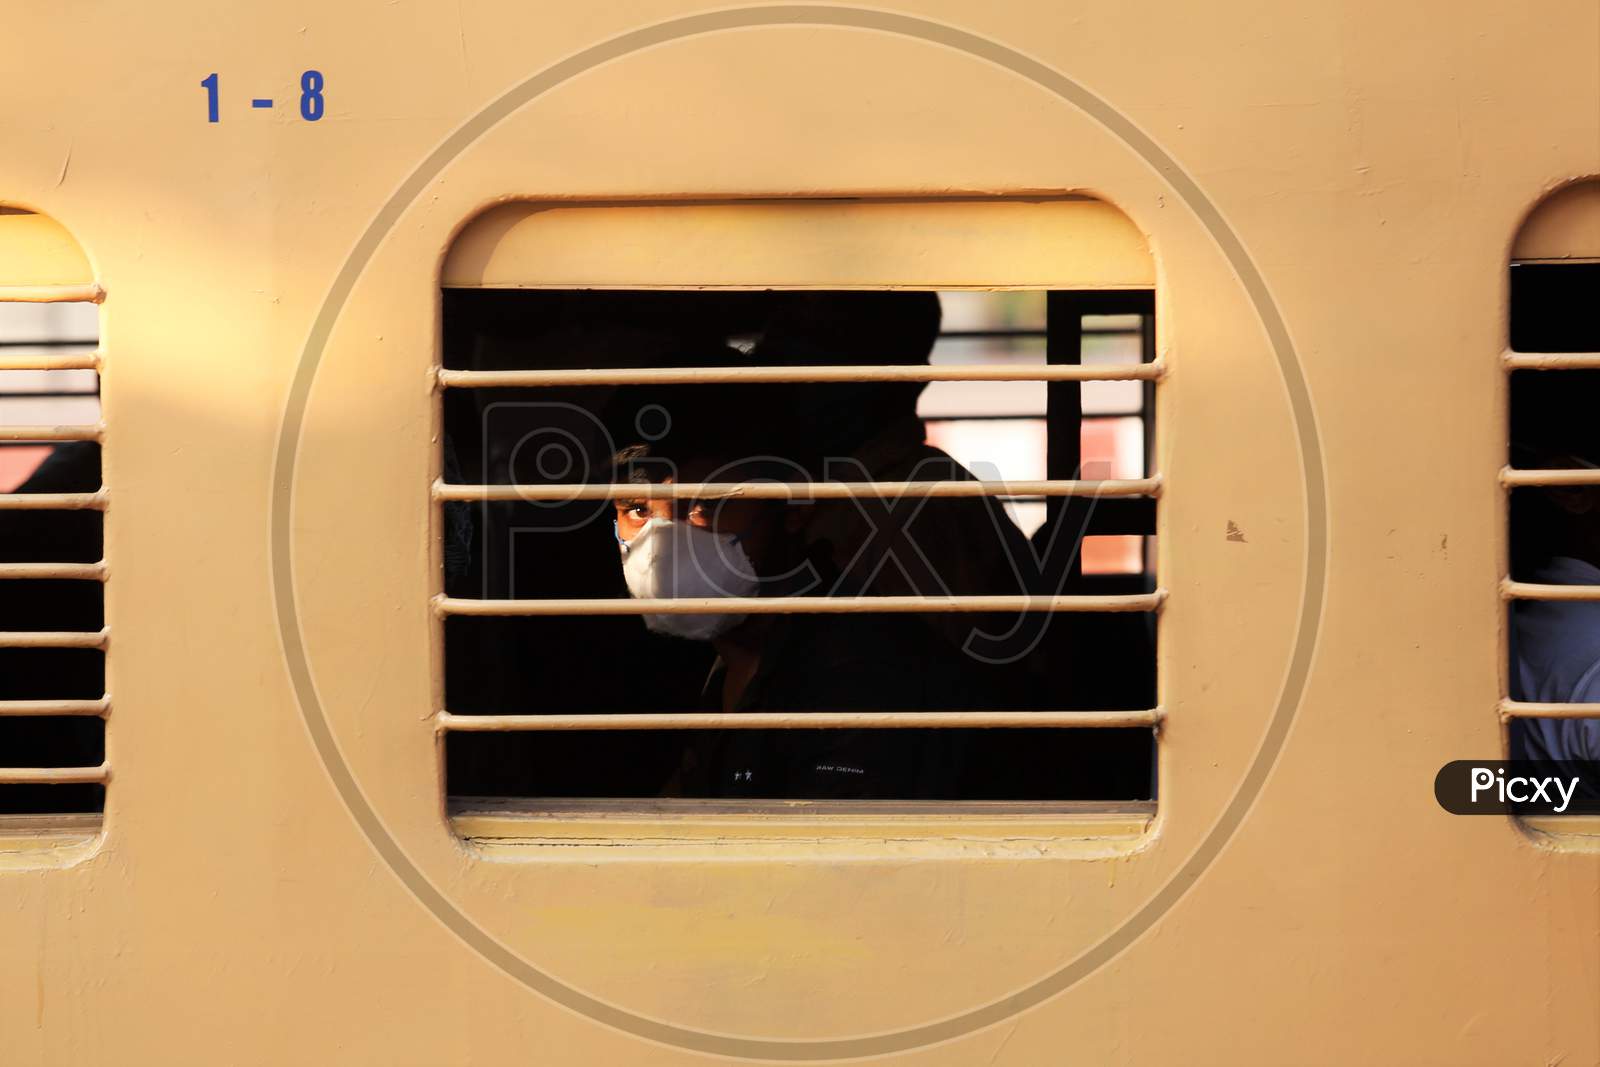 A man looks out of the window as he travels to Danapur, Bihar in a special train arranged by the government to repatriate migrant workers at the Chikkabanavara Junction Railway Station on the outskirts of Bangalore, India.